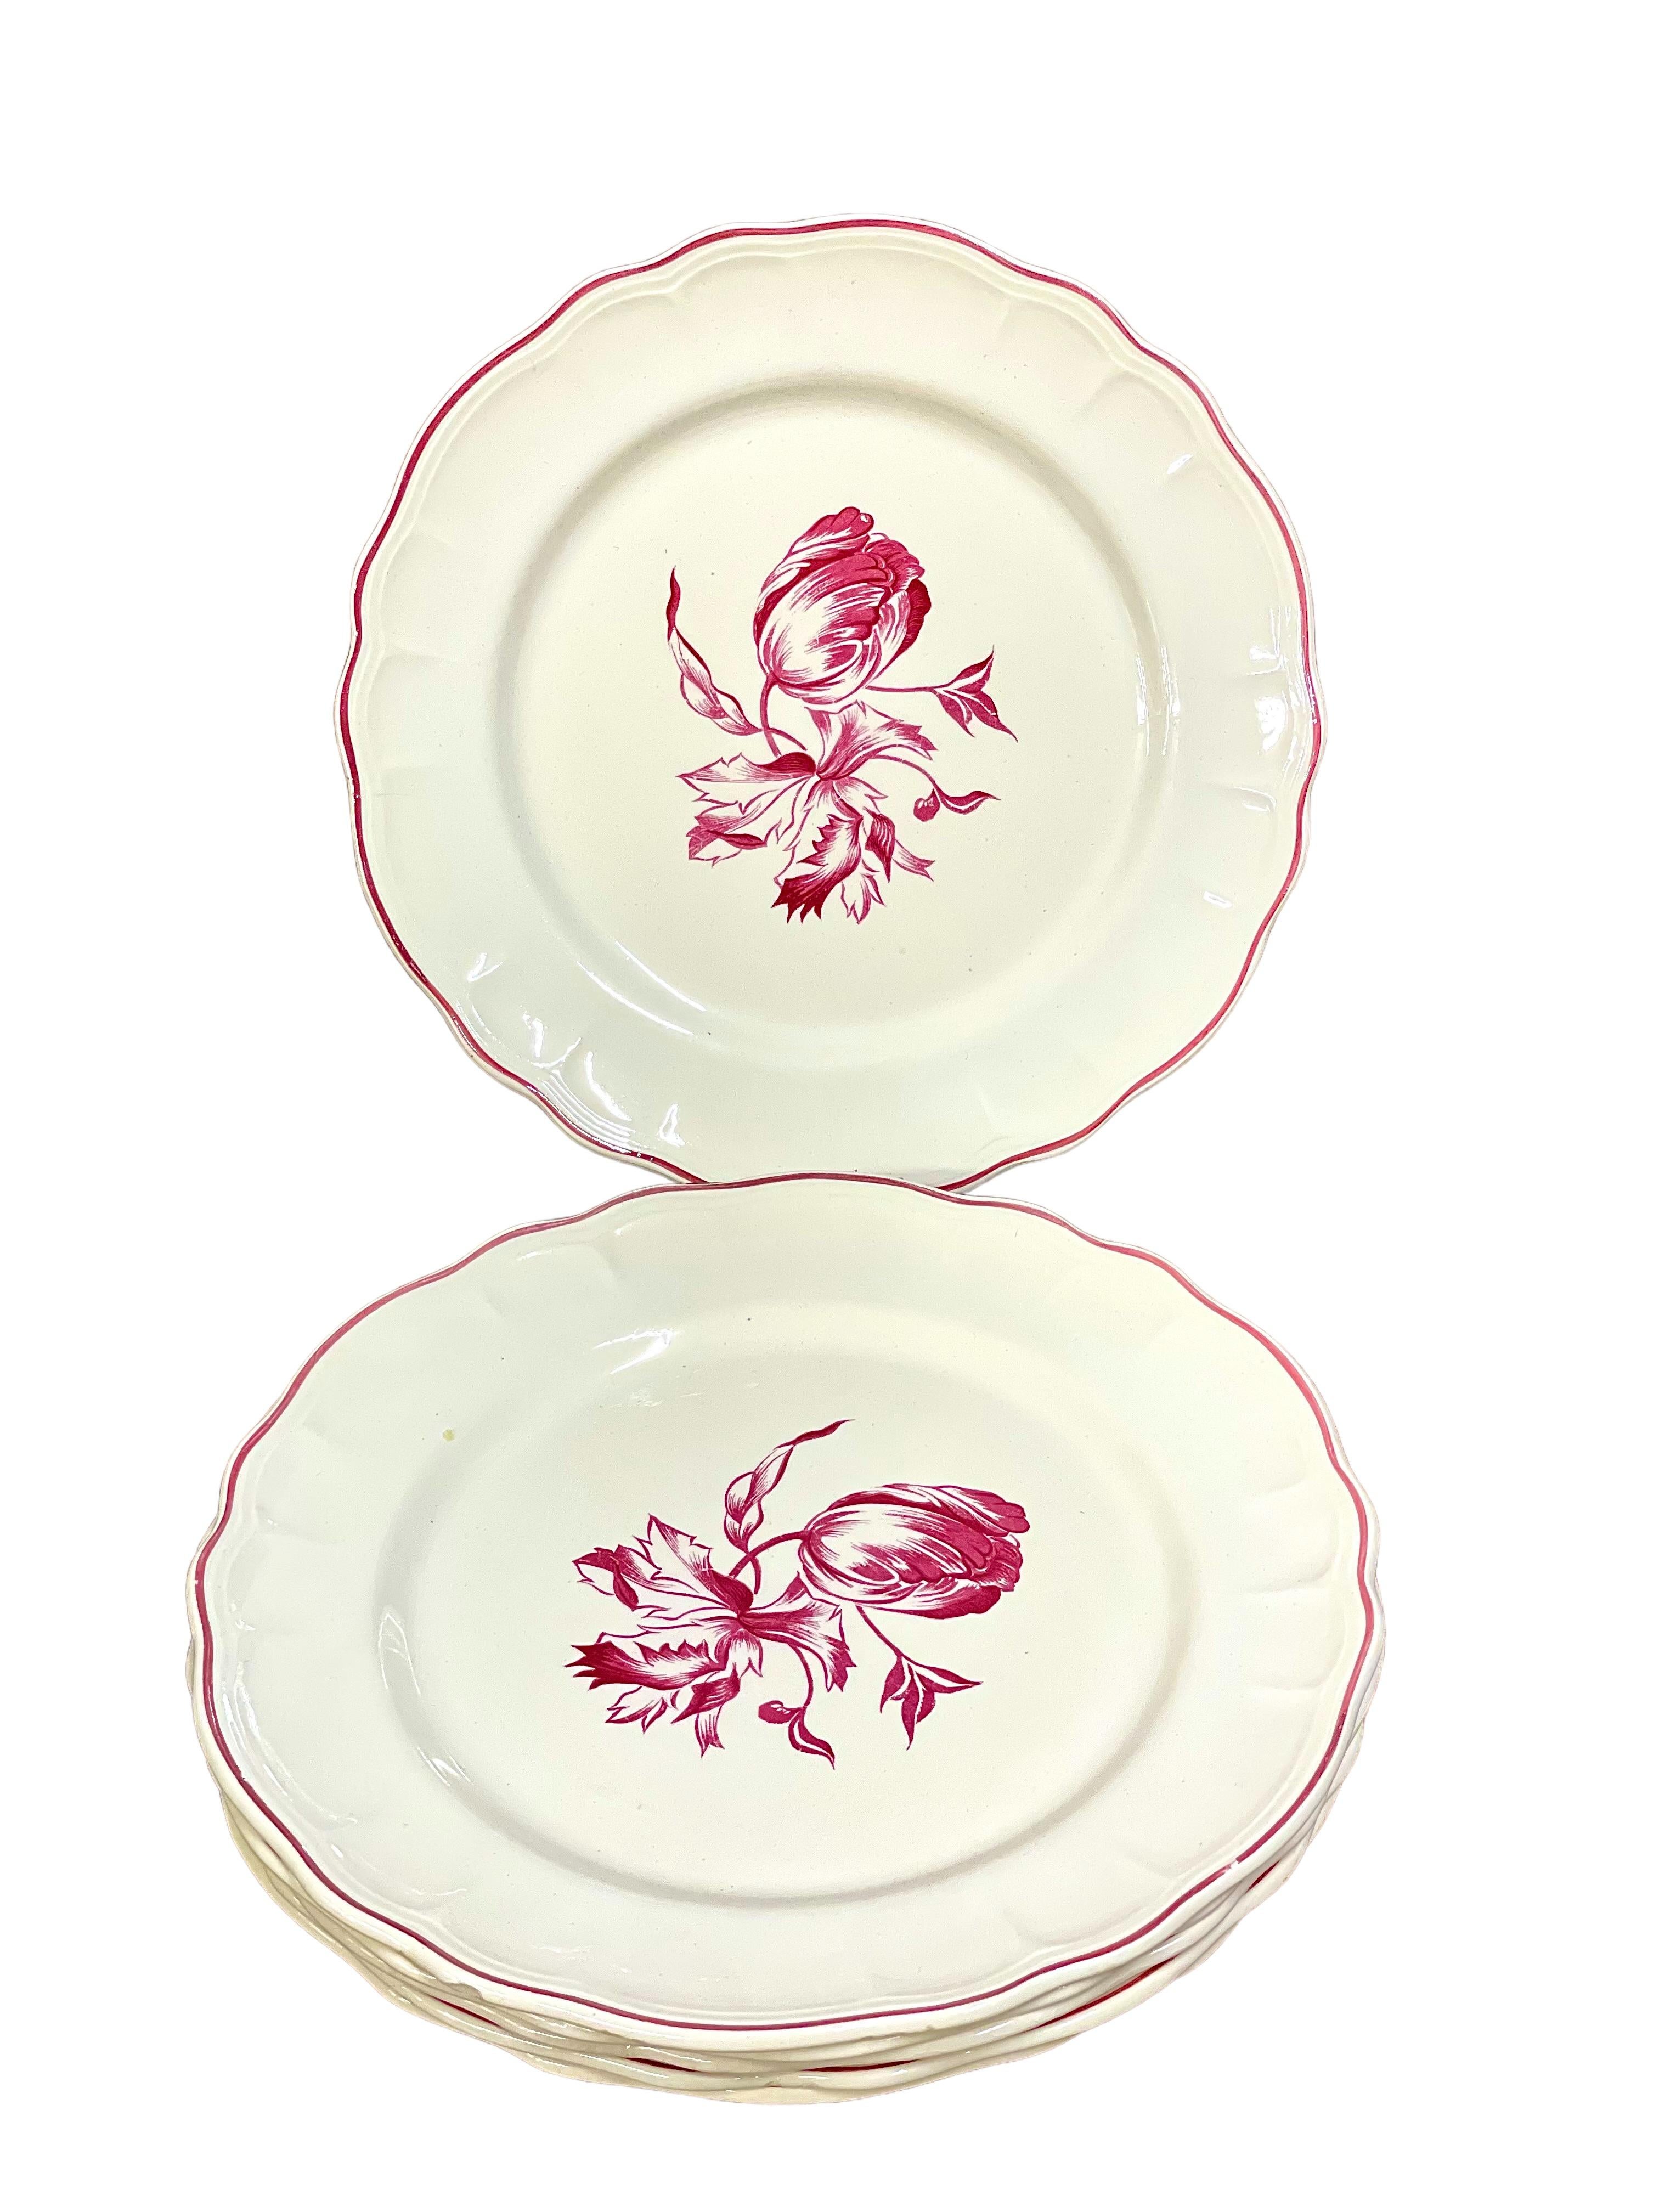 Set of six vintage creamware dinner plates, beautifully decorated with a red transferware print of delicate tulips and foliage. The plates have a pretty scalloped rim, highlighted with a hand- painted red border and are in excellent vintage